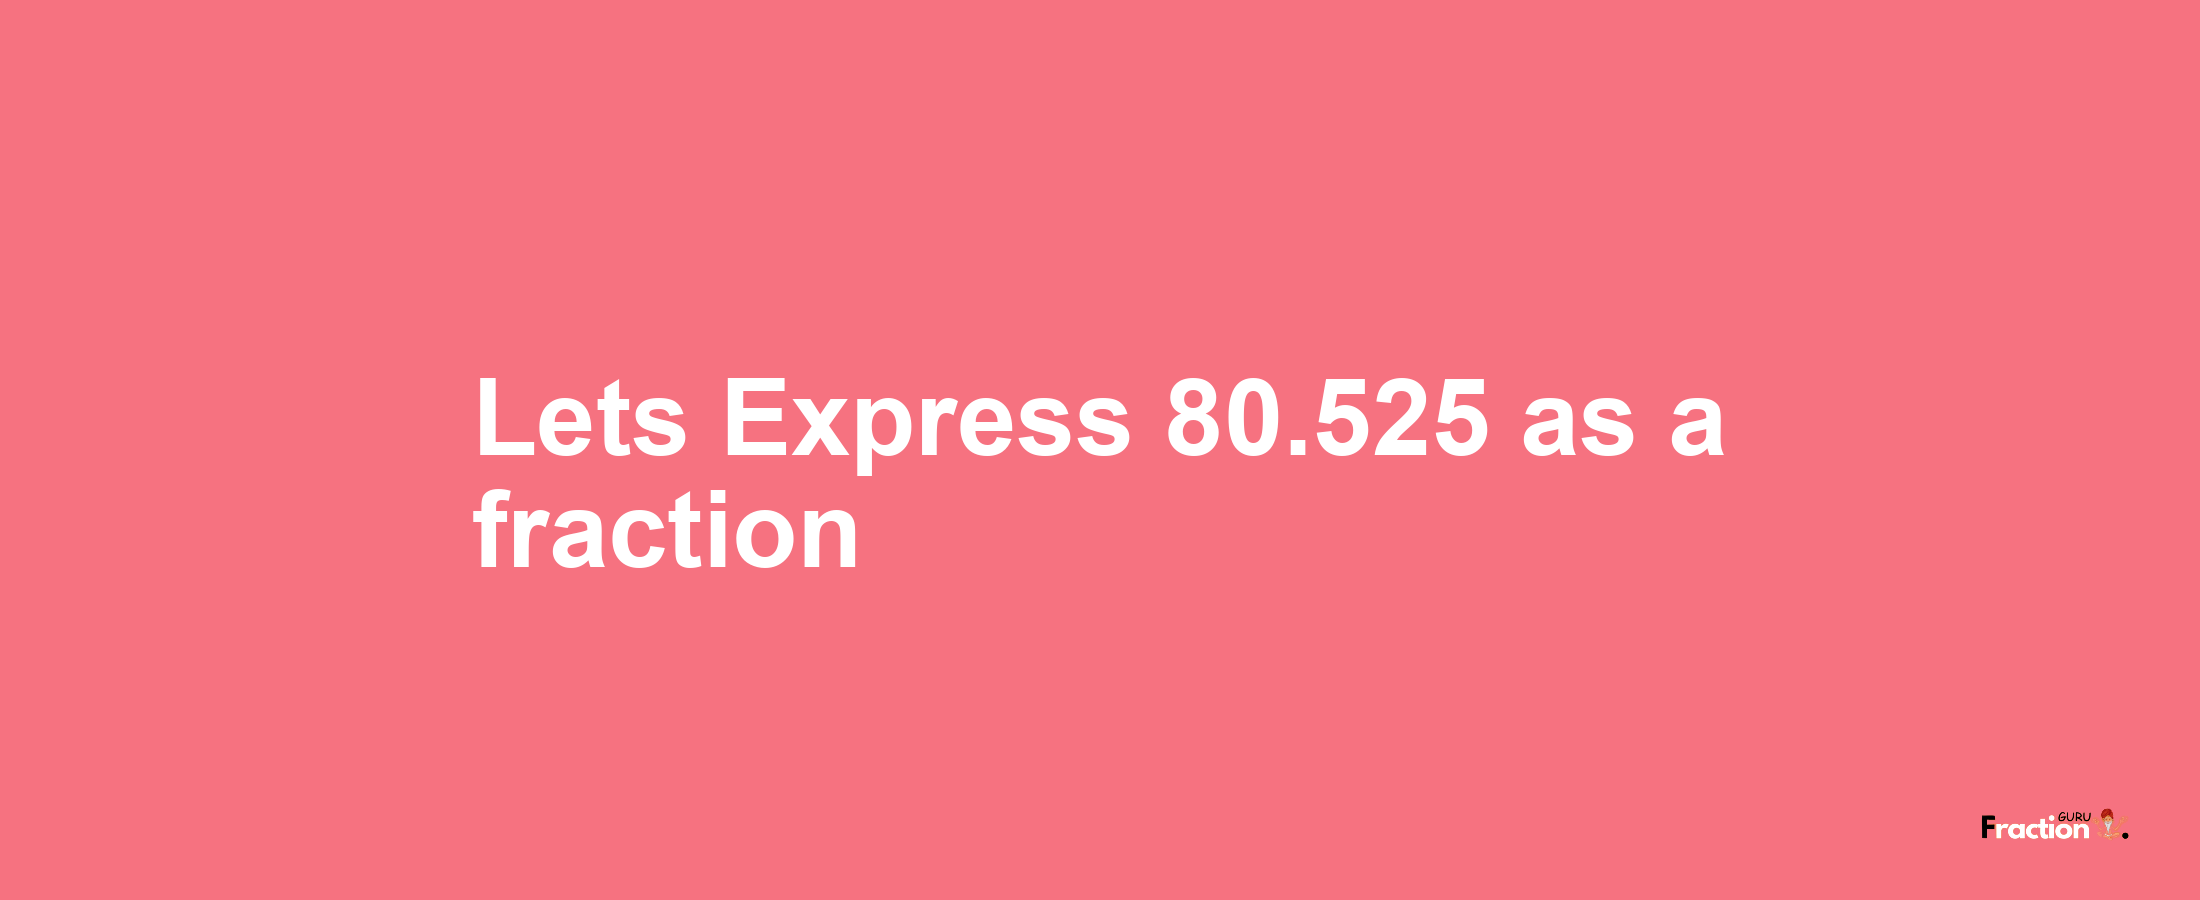 Lets Express 80.525 as afraction